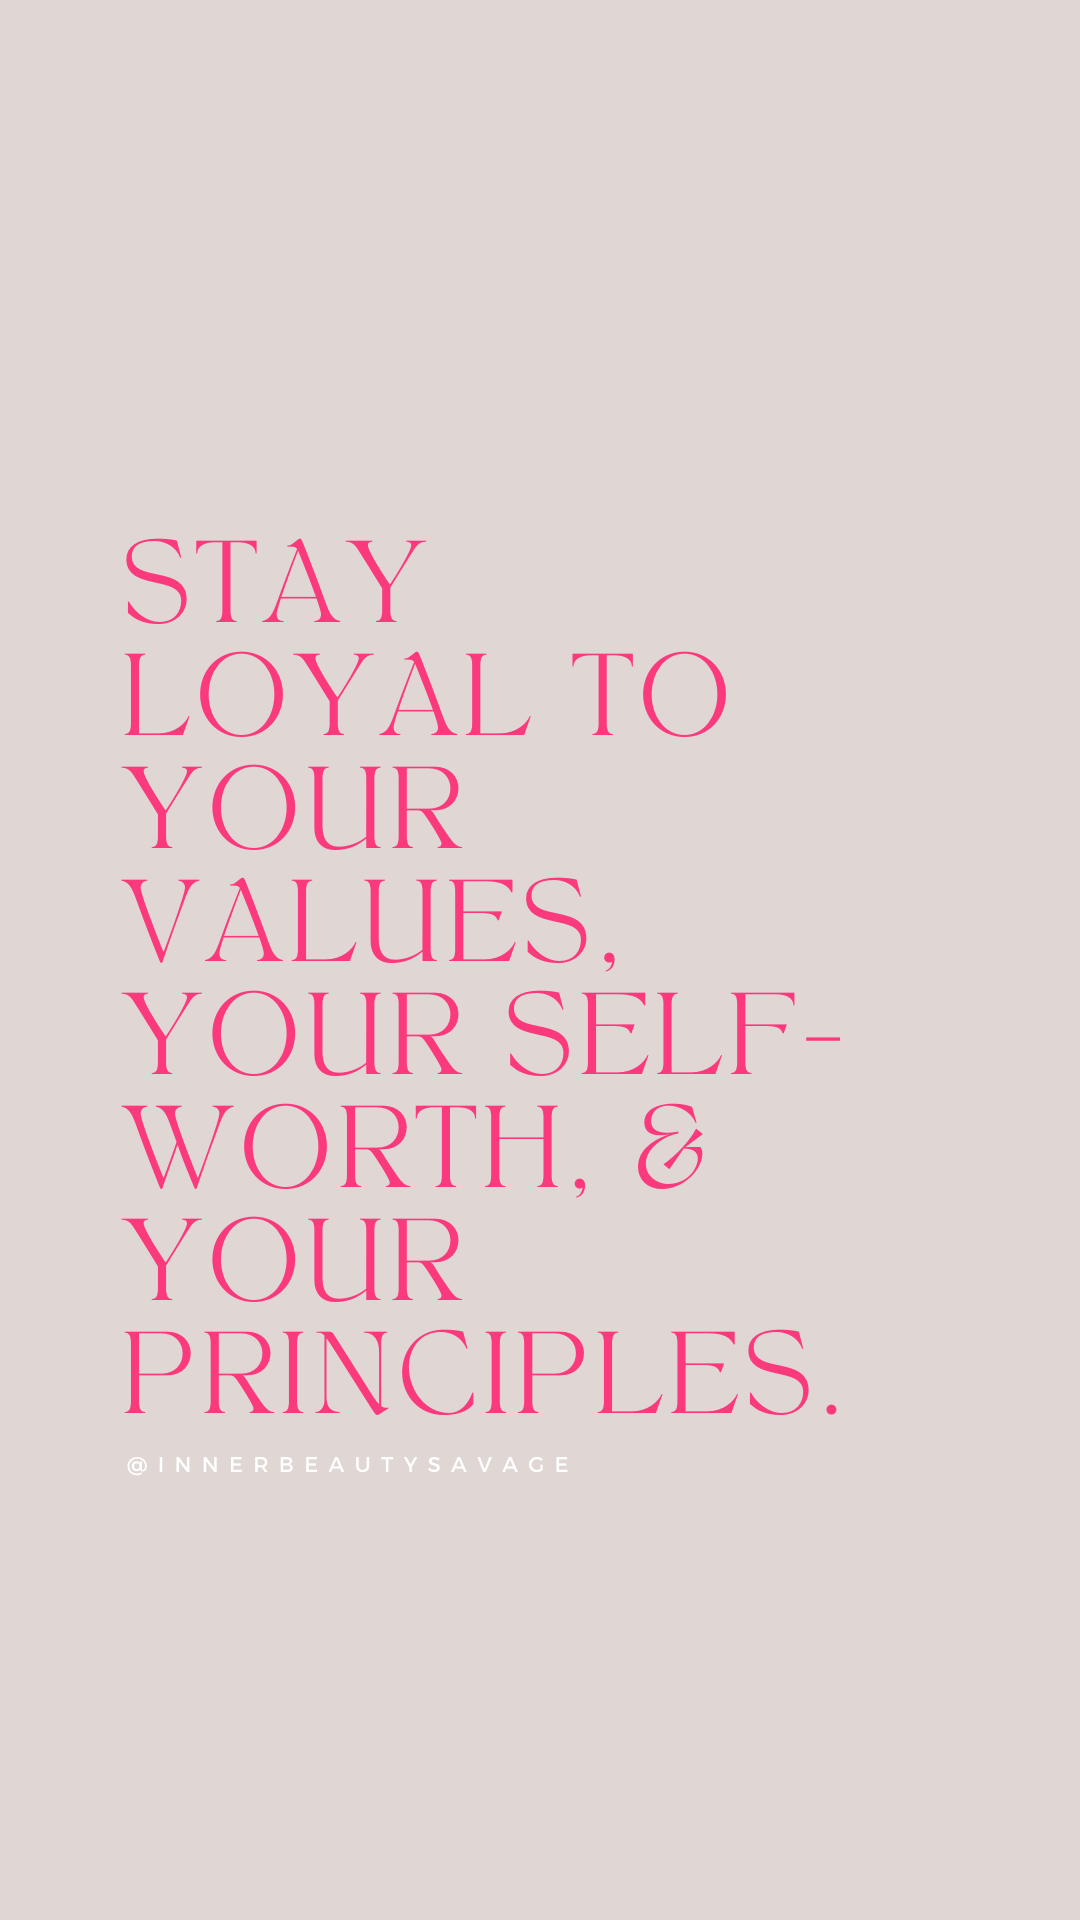 Quote on Staying Loyal To Yourself & Values